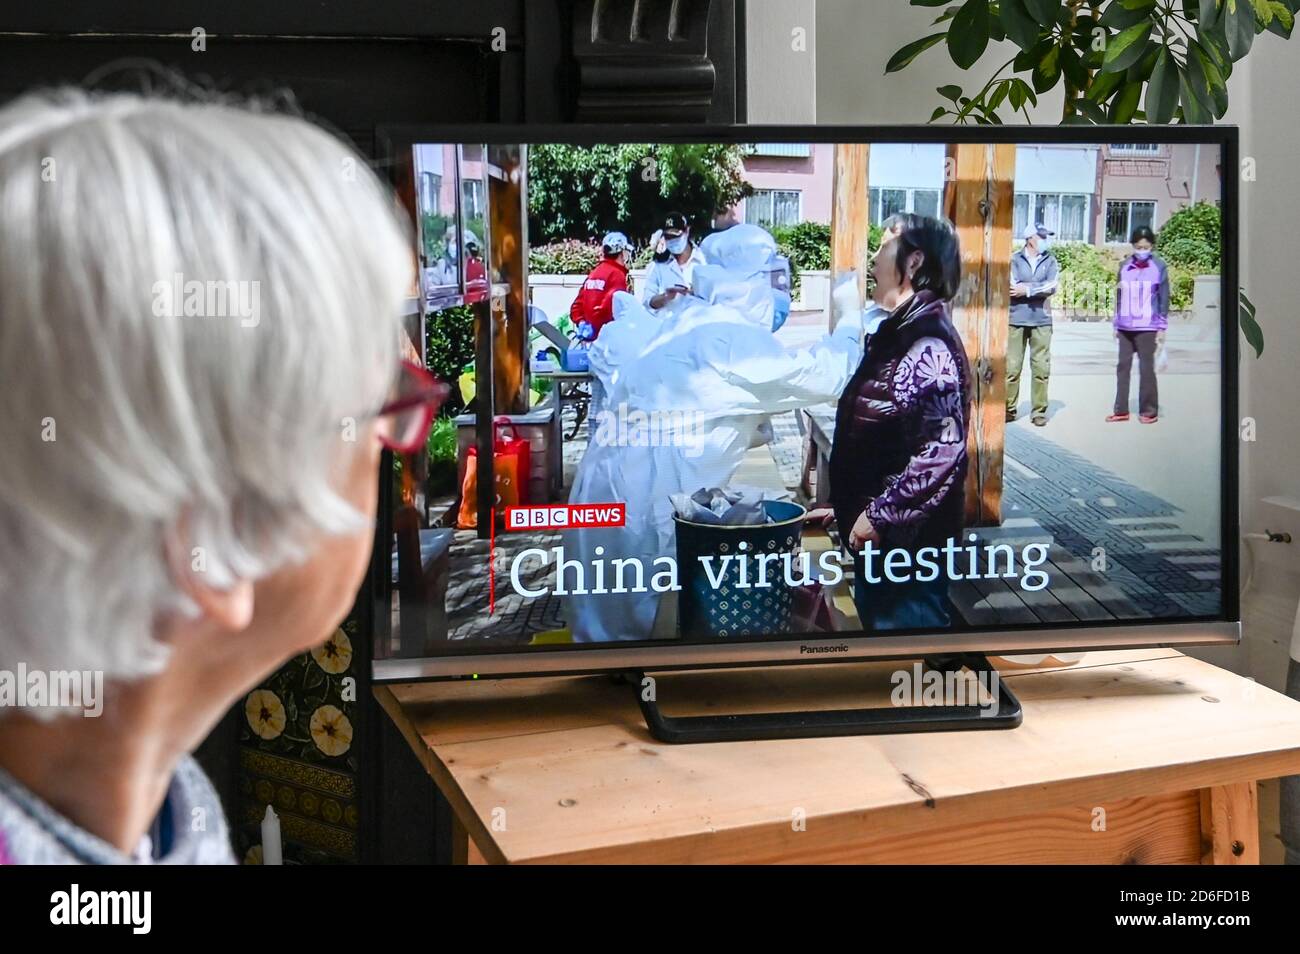 Televised news report of testing Chinese citizens in China for Covid-19,  with 'China virus testing' text, watched by an older viewer. Stock Photo